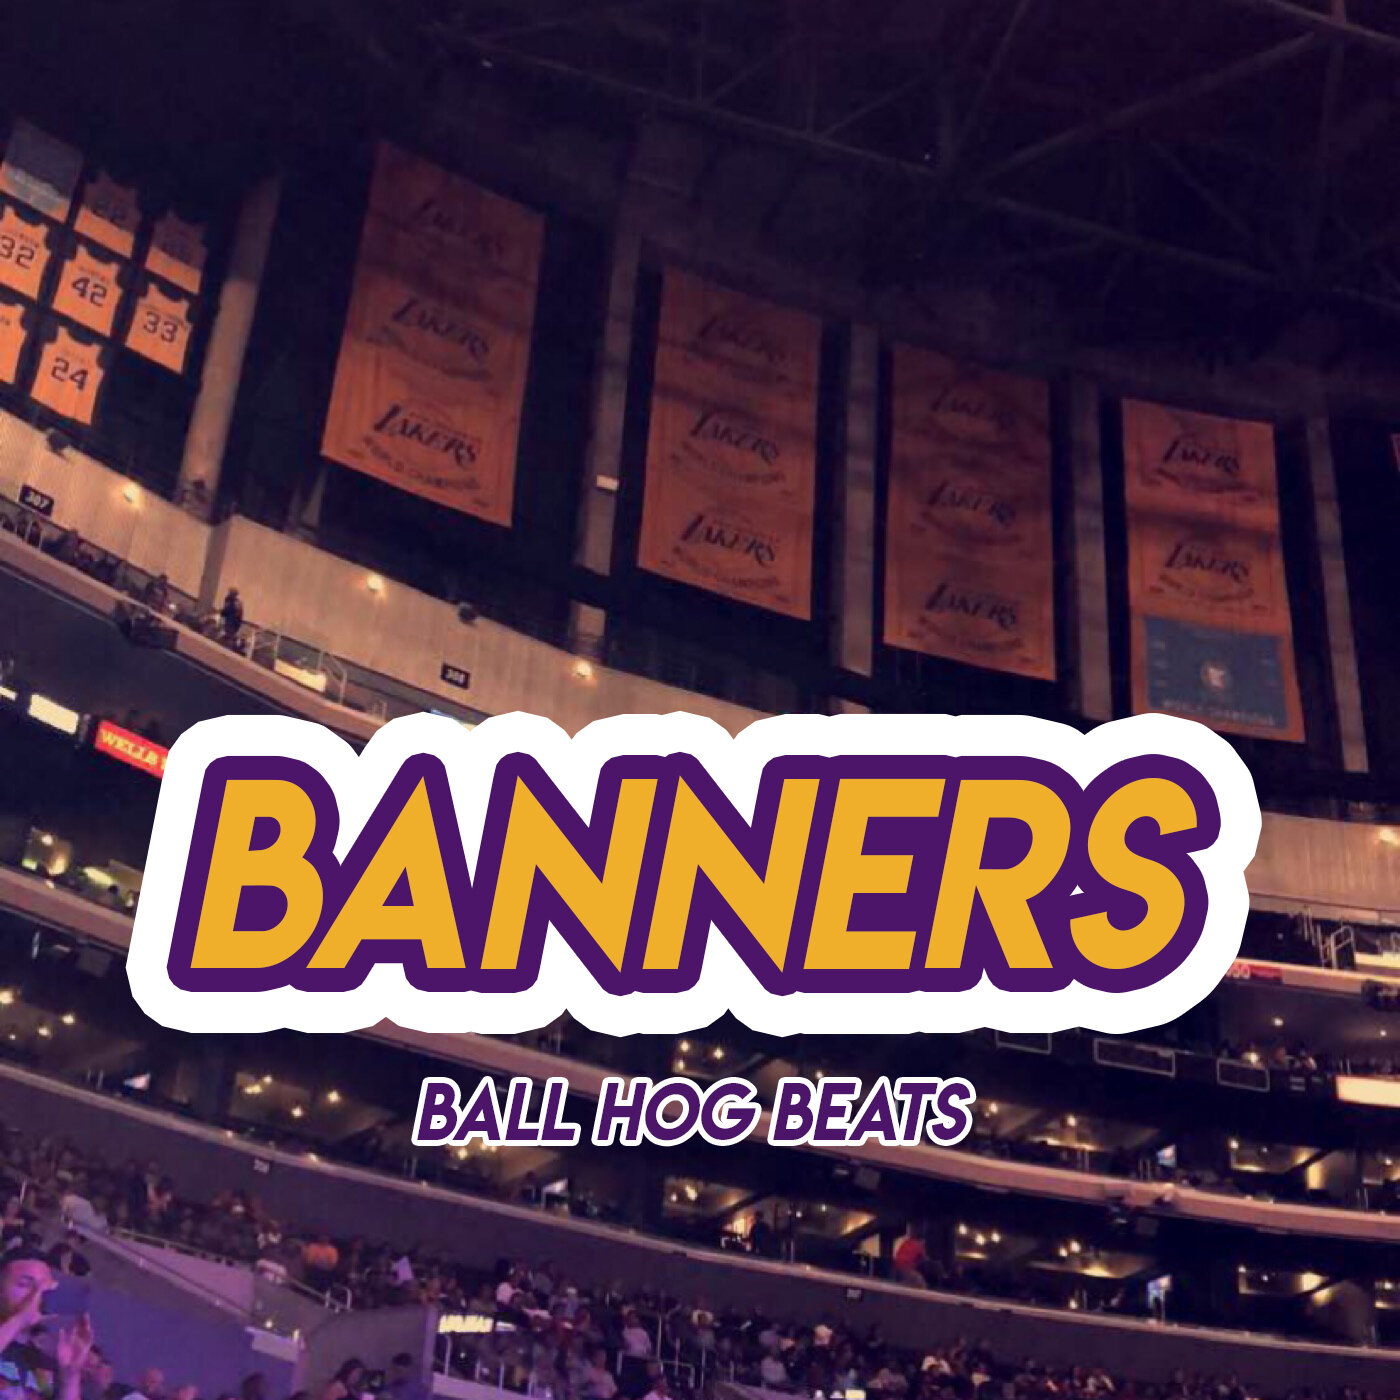 Banners (2020)